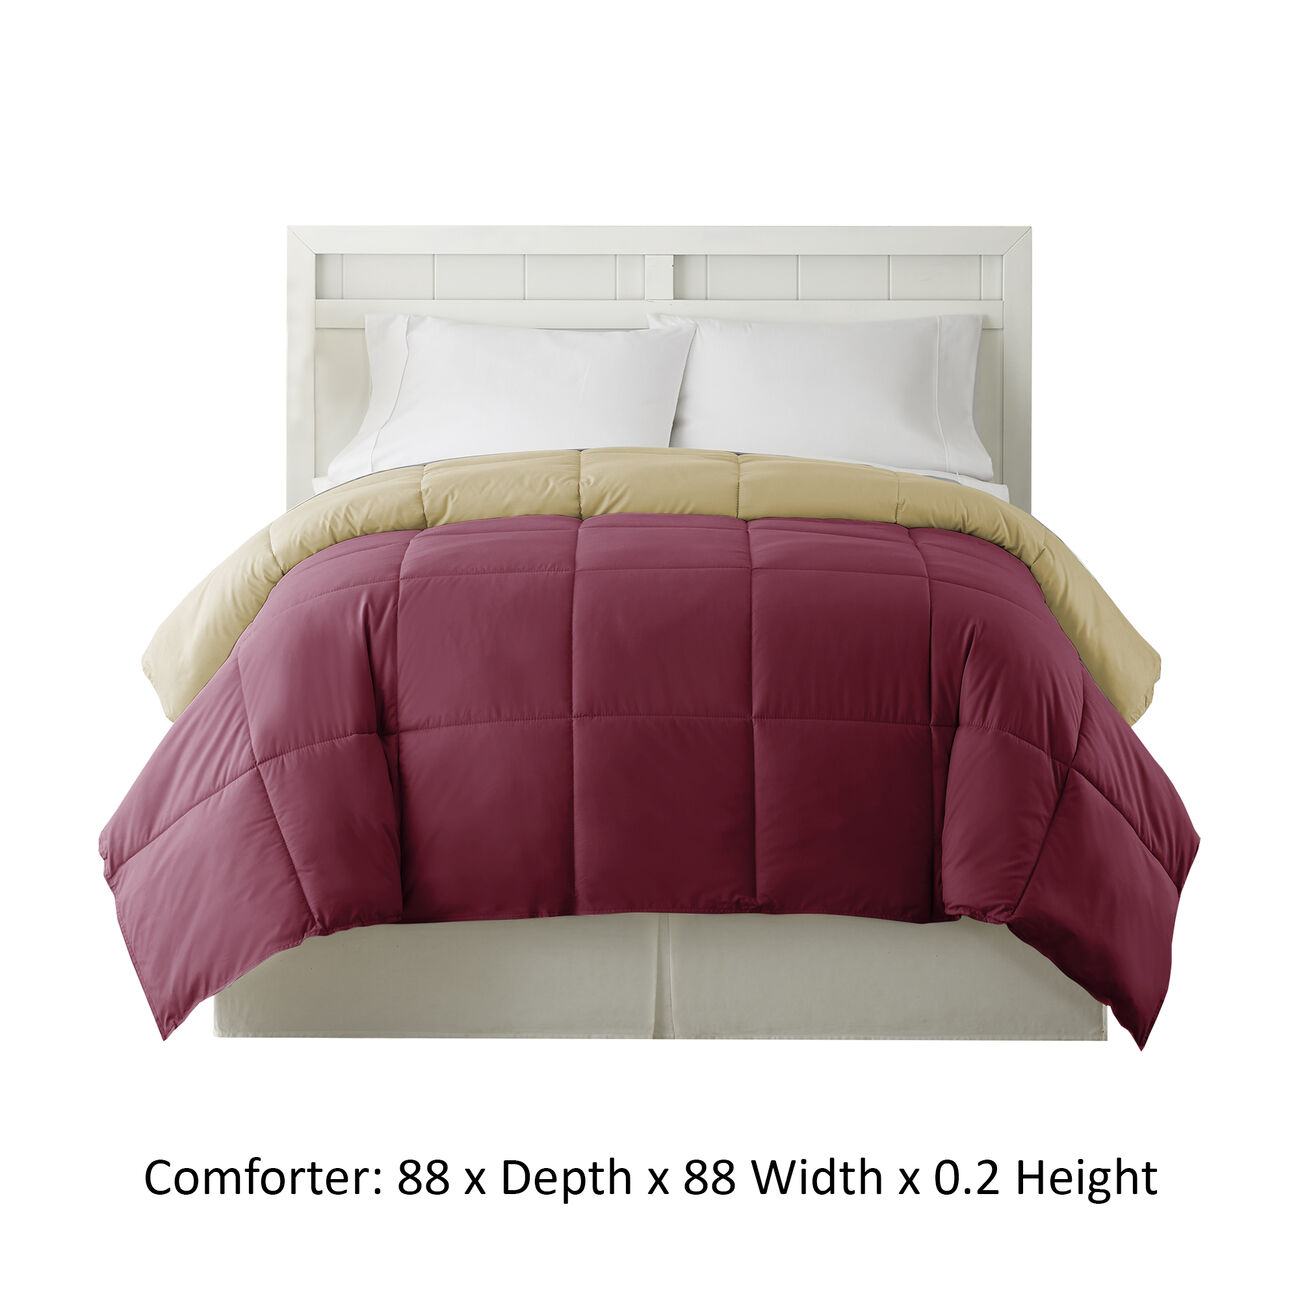 Genoa Queen Size Box Quilted Reversible Comforter The Urban Port, Pink and Beige